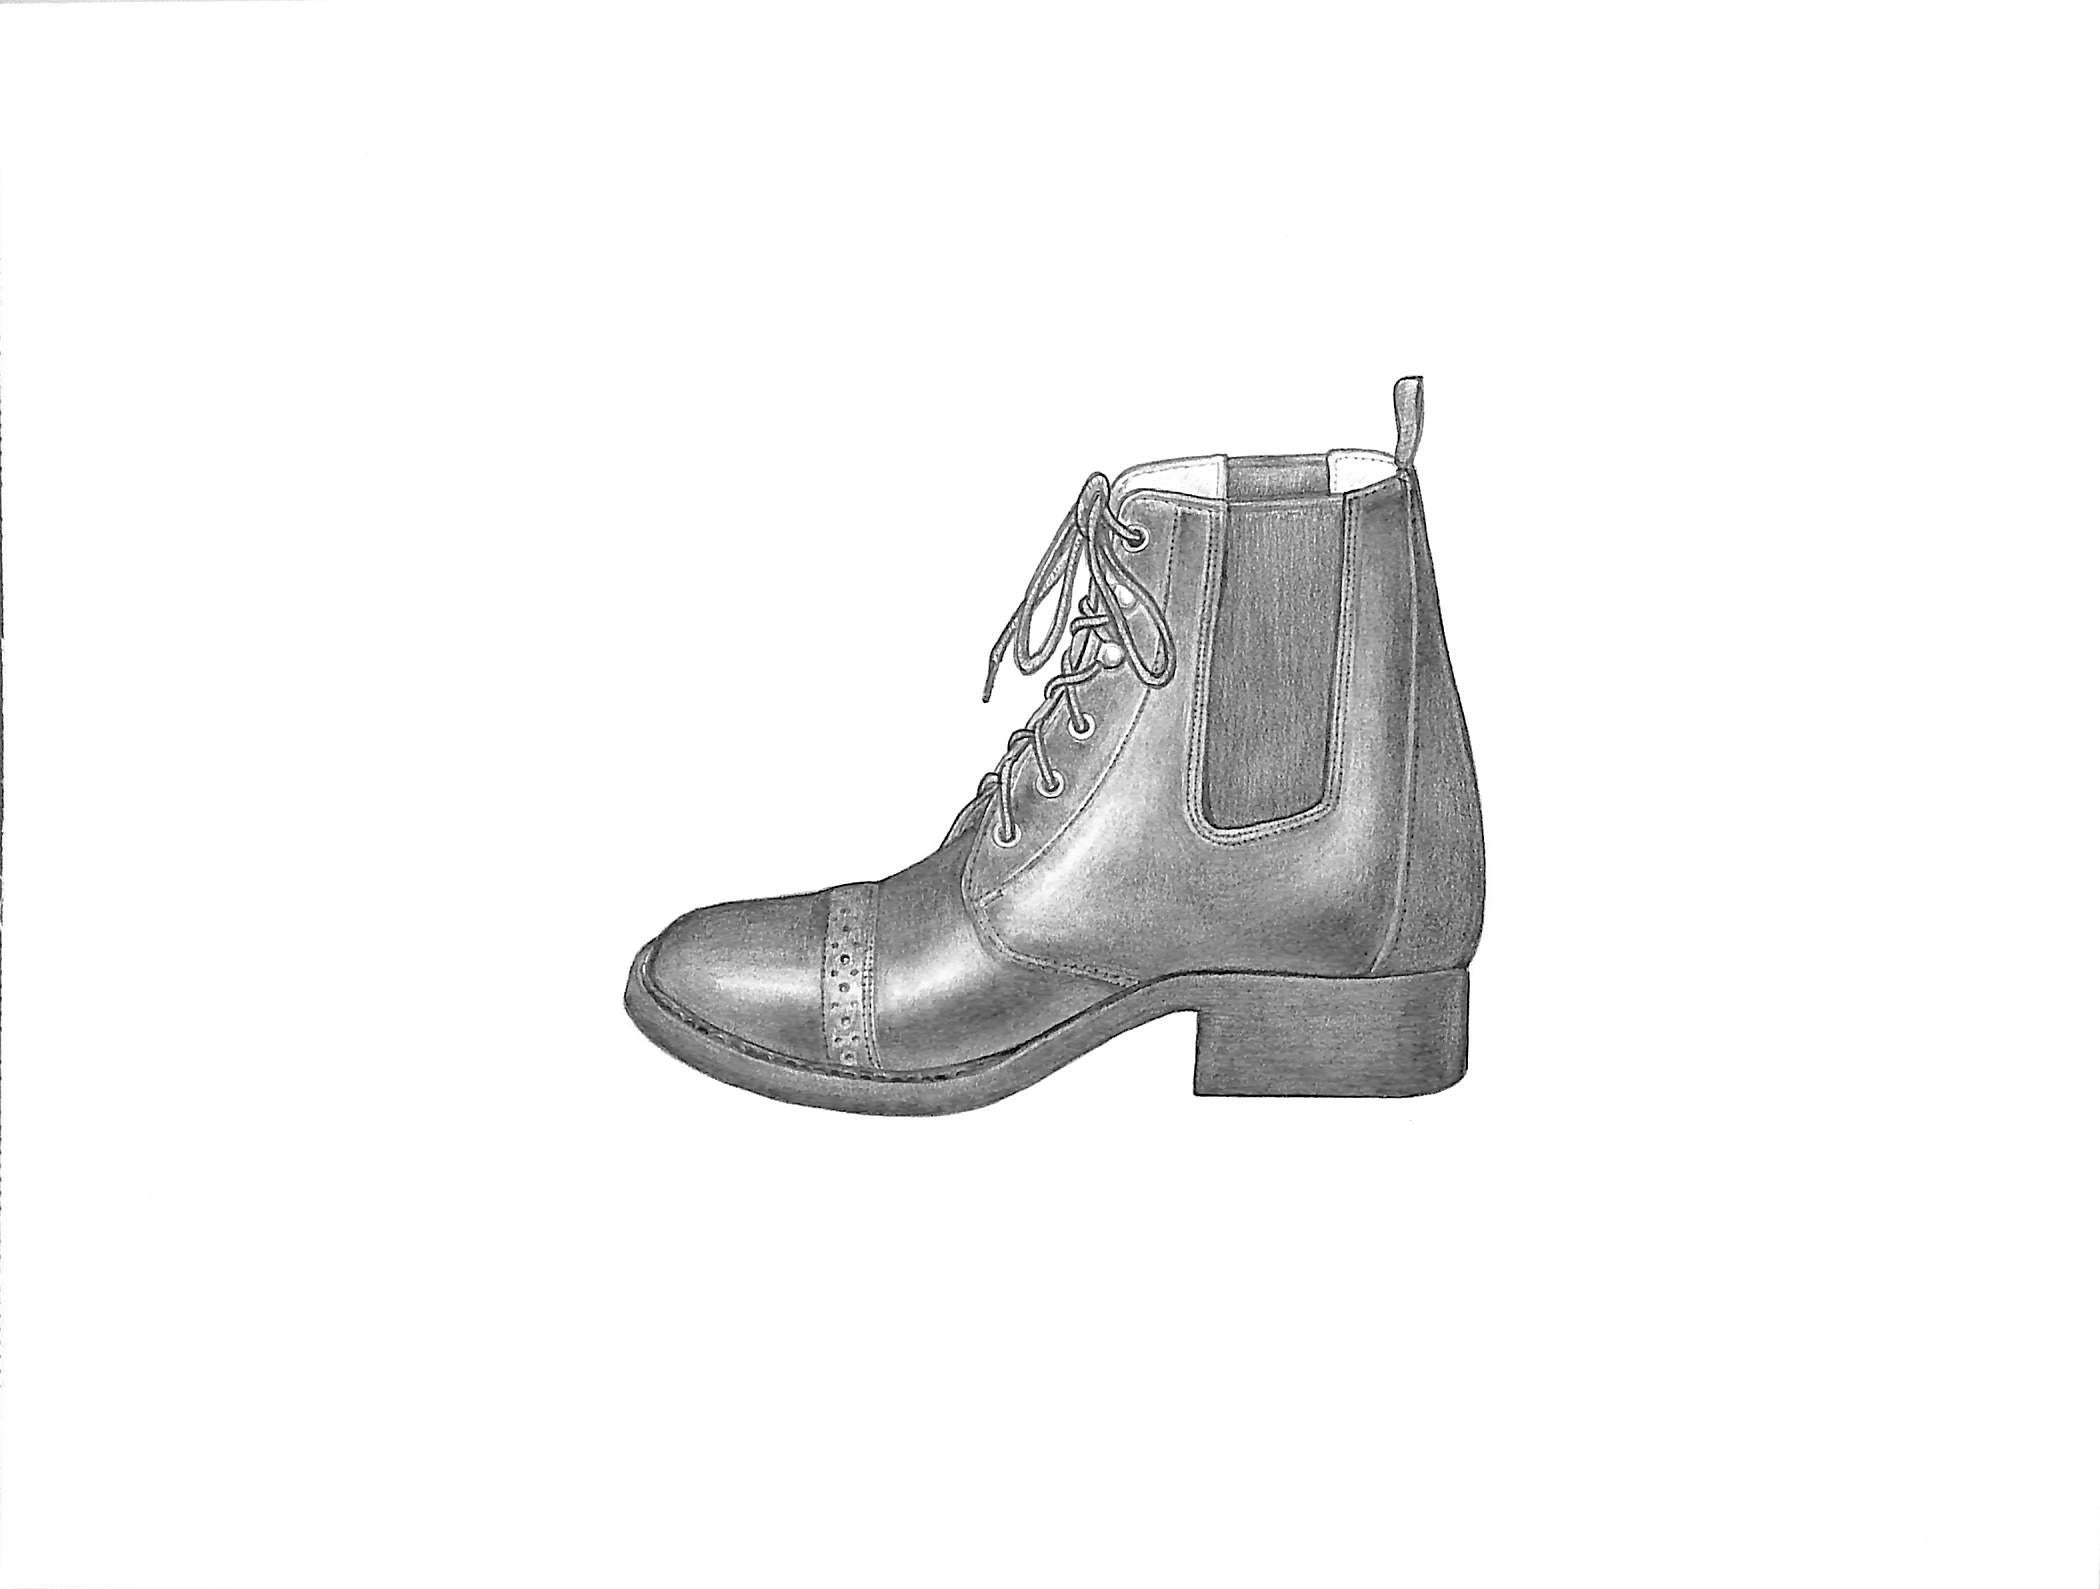 C. Paddock Boot 2003 Graphite Drawing - Art by Unknown